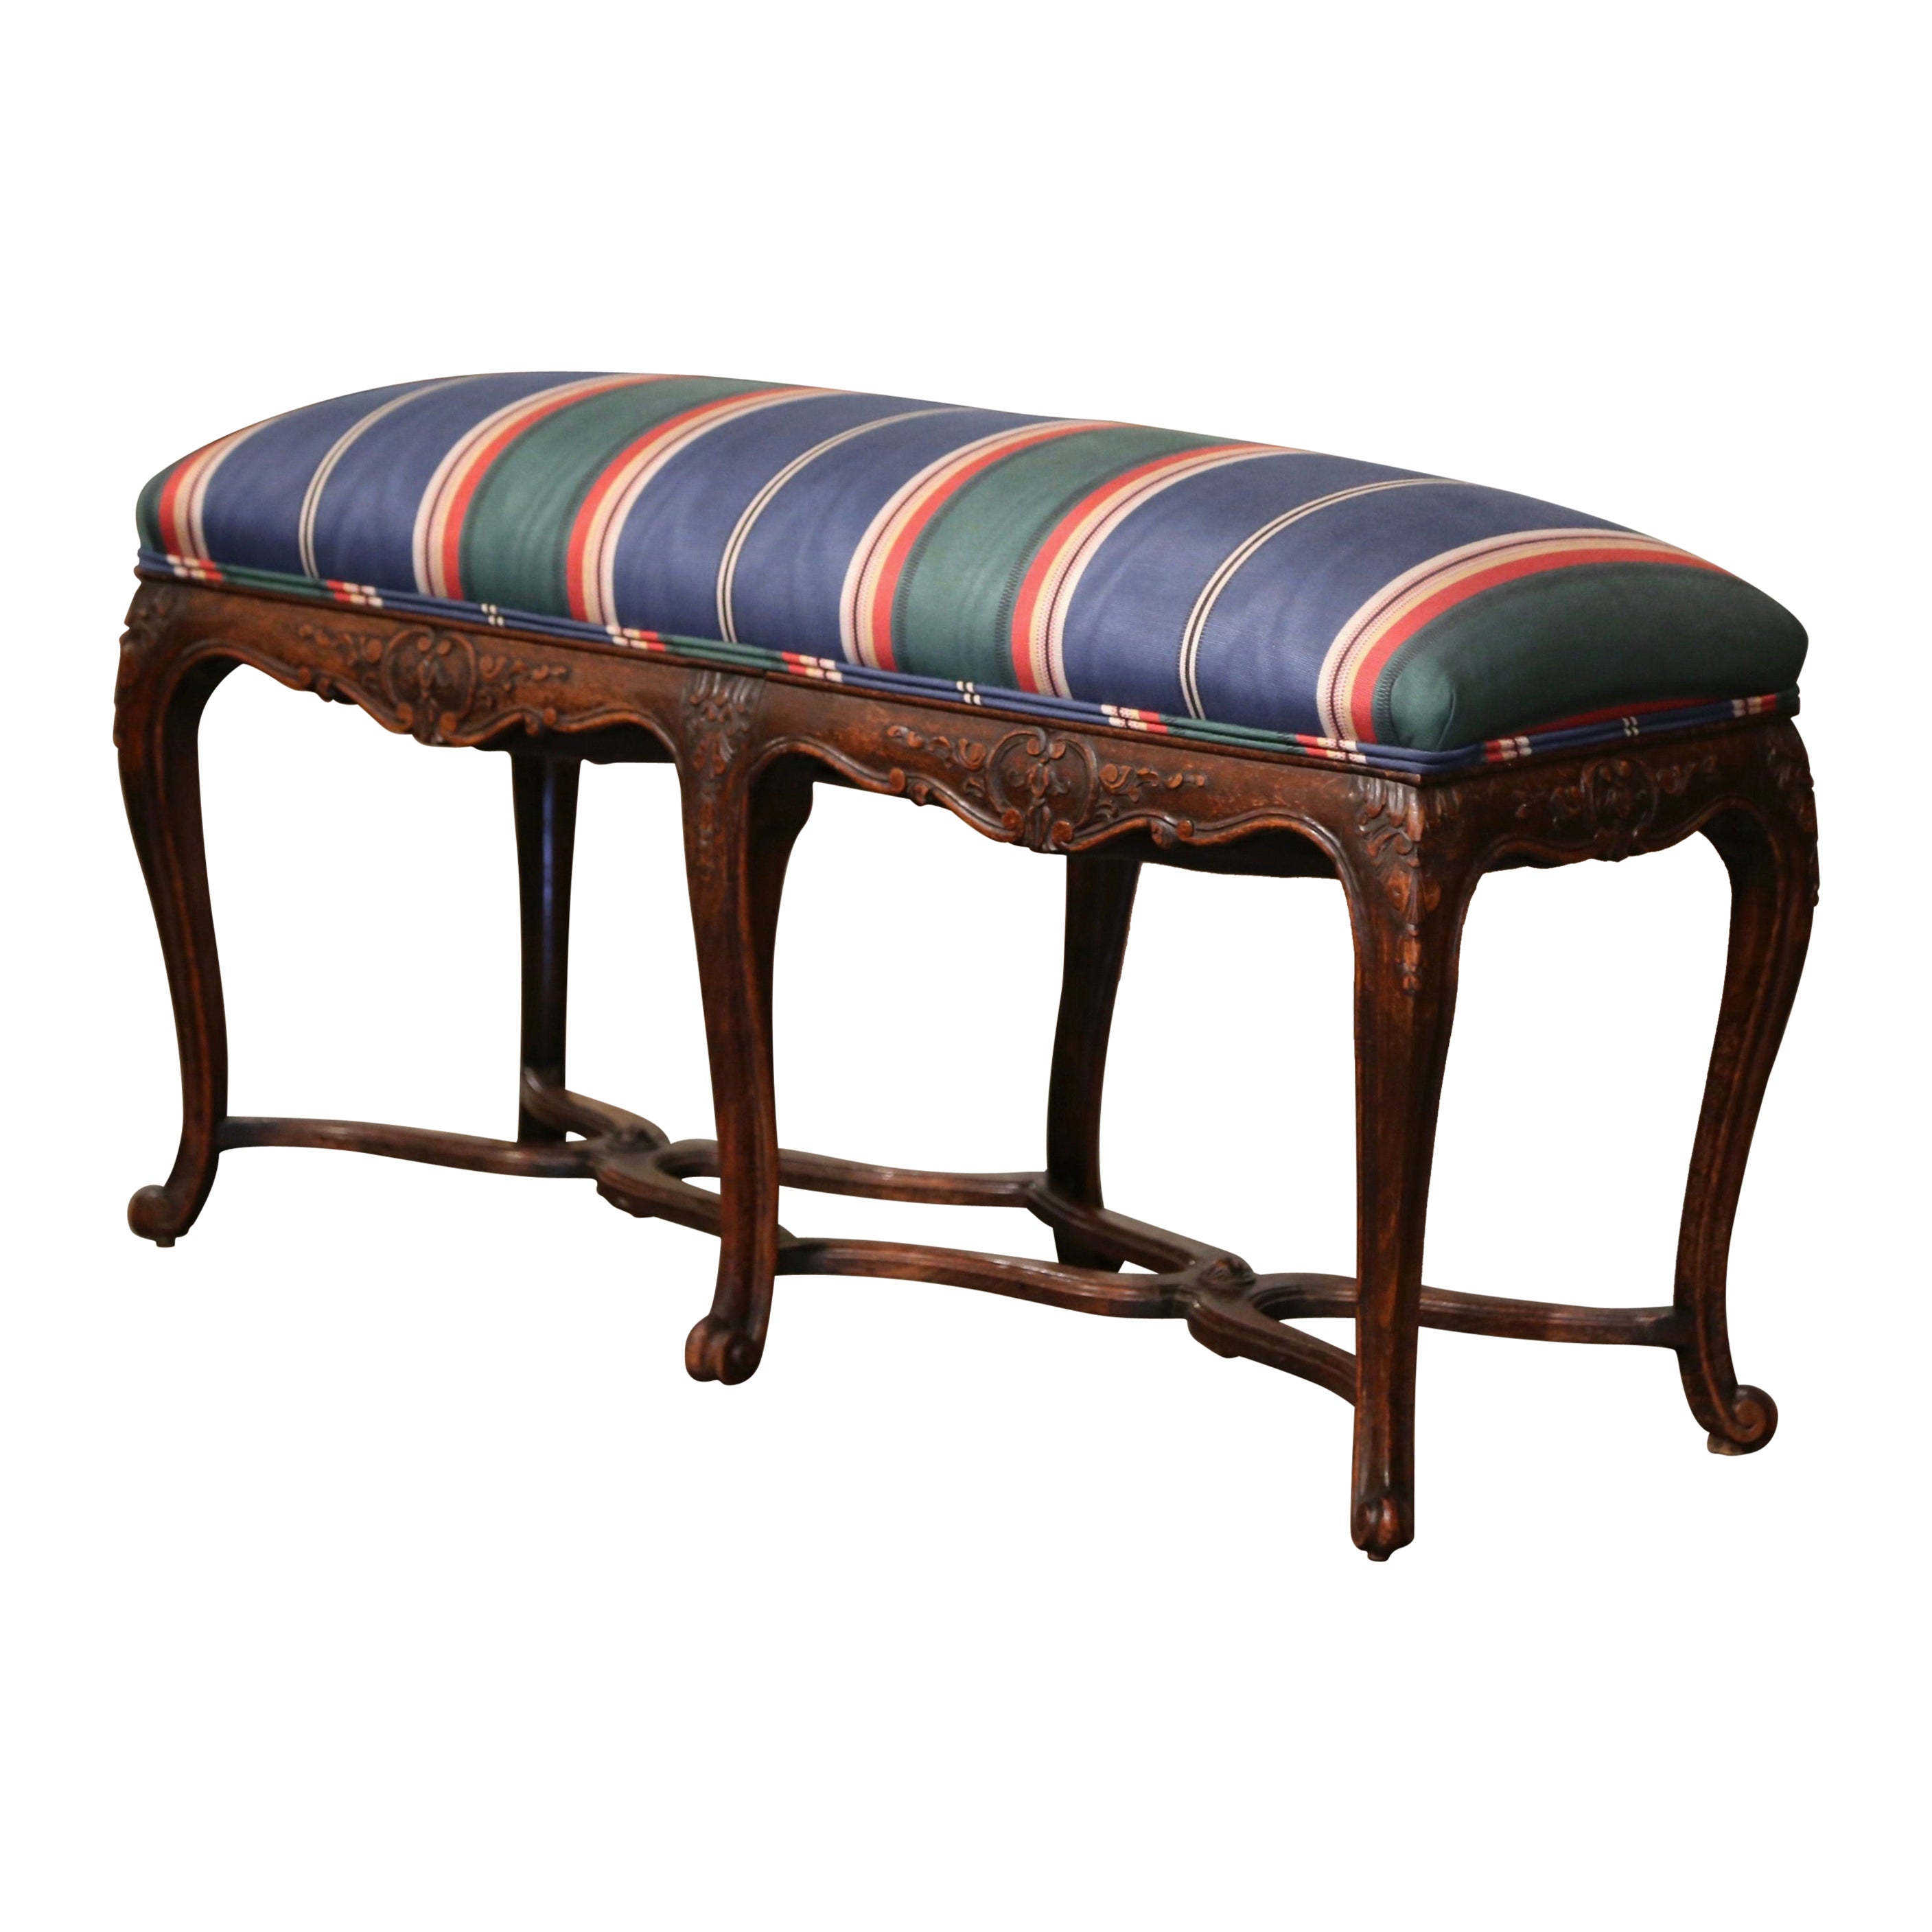 Early 20th Century French Louis XV Carved Walnut Six-Leg Upholstered Bench 